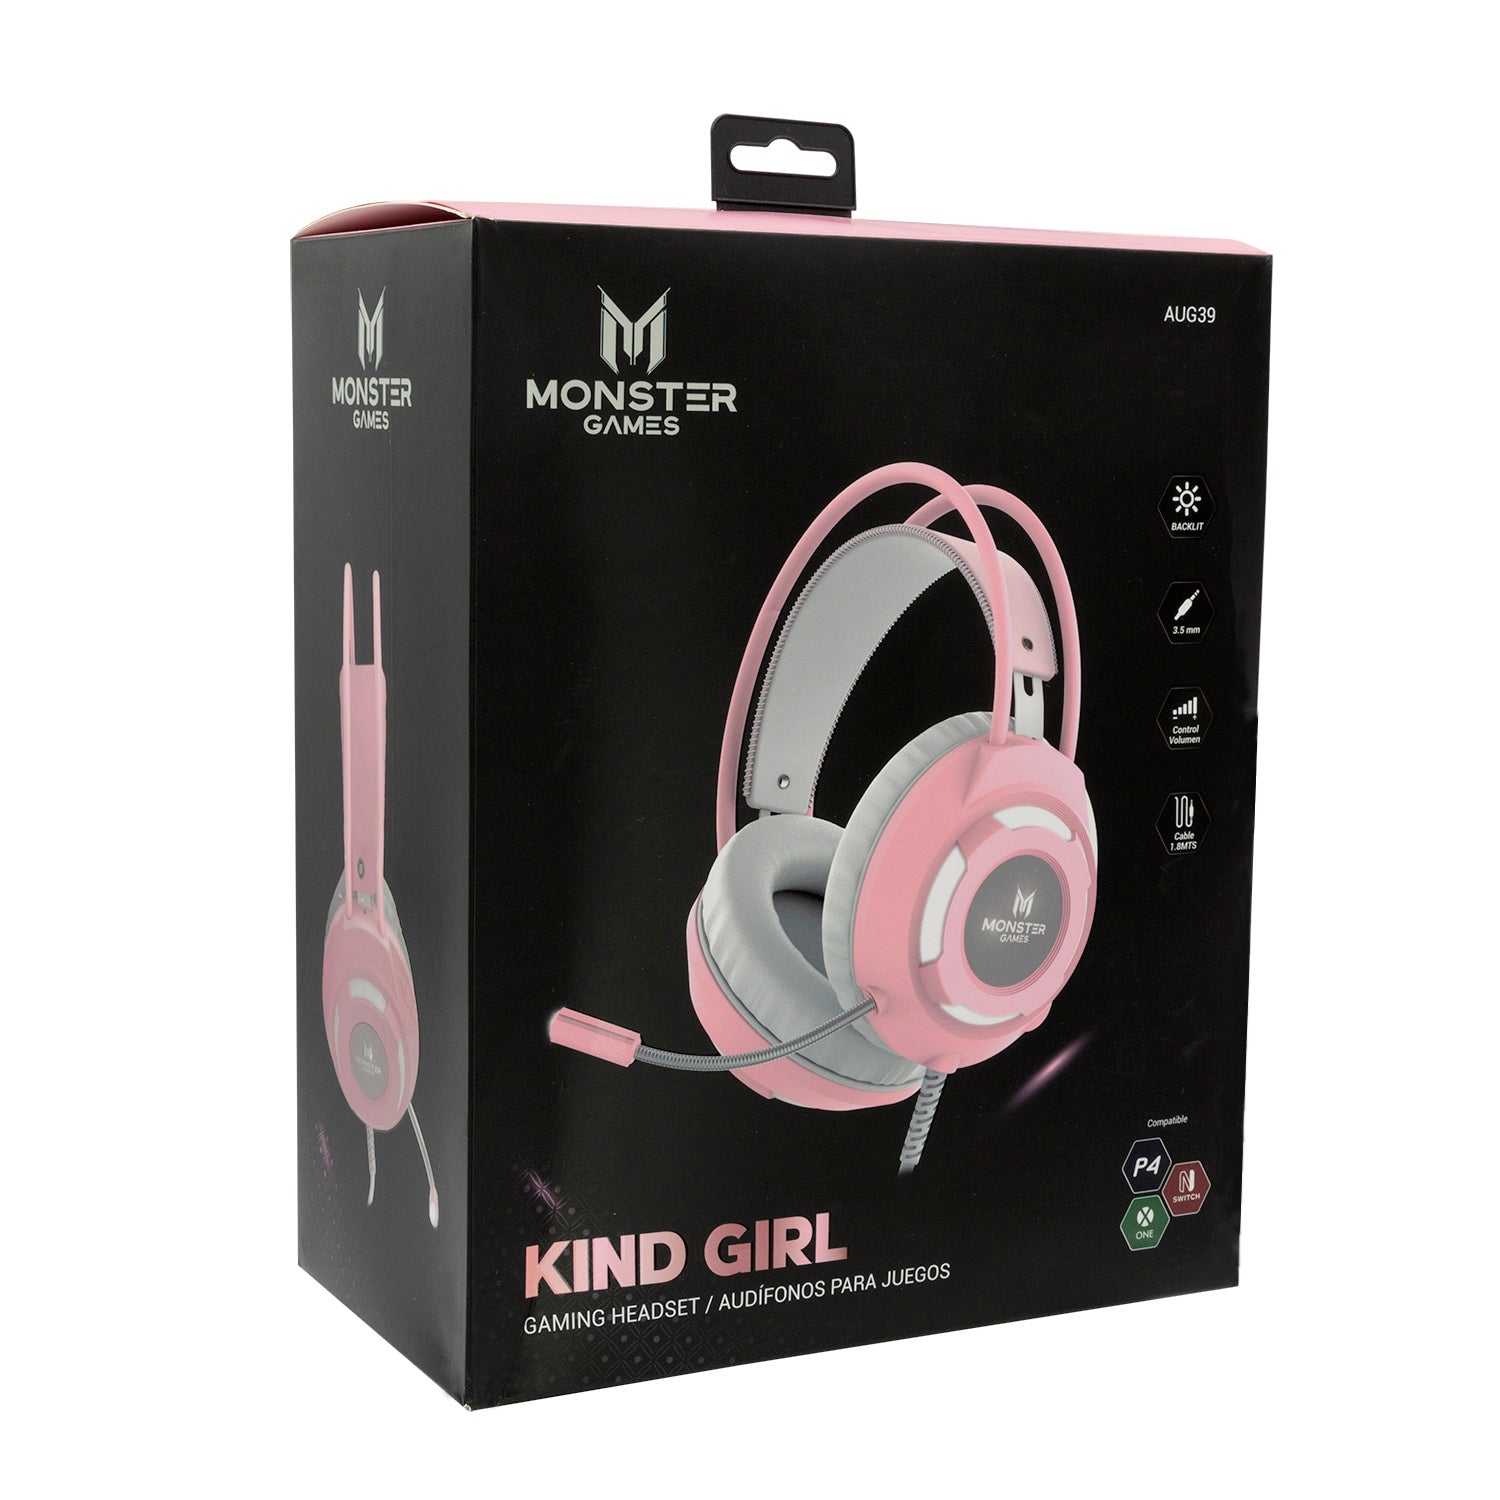 Audifonos Gamer Monster Kind Girl Para Ps4, Xbox One, Switch